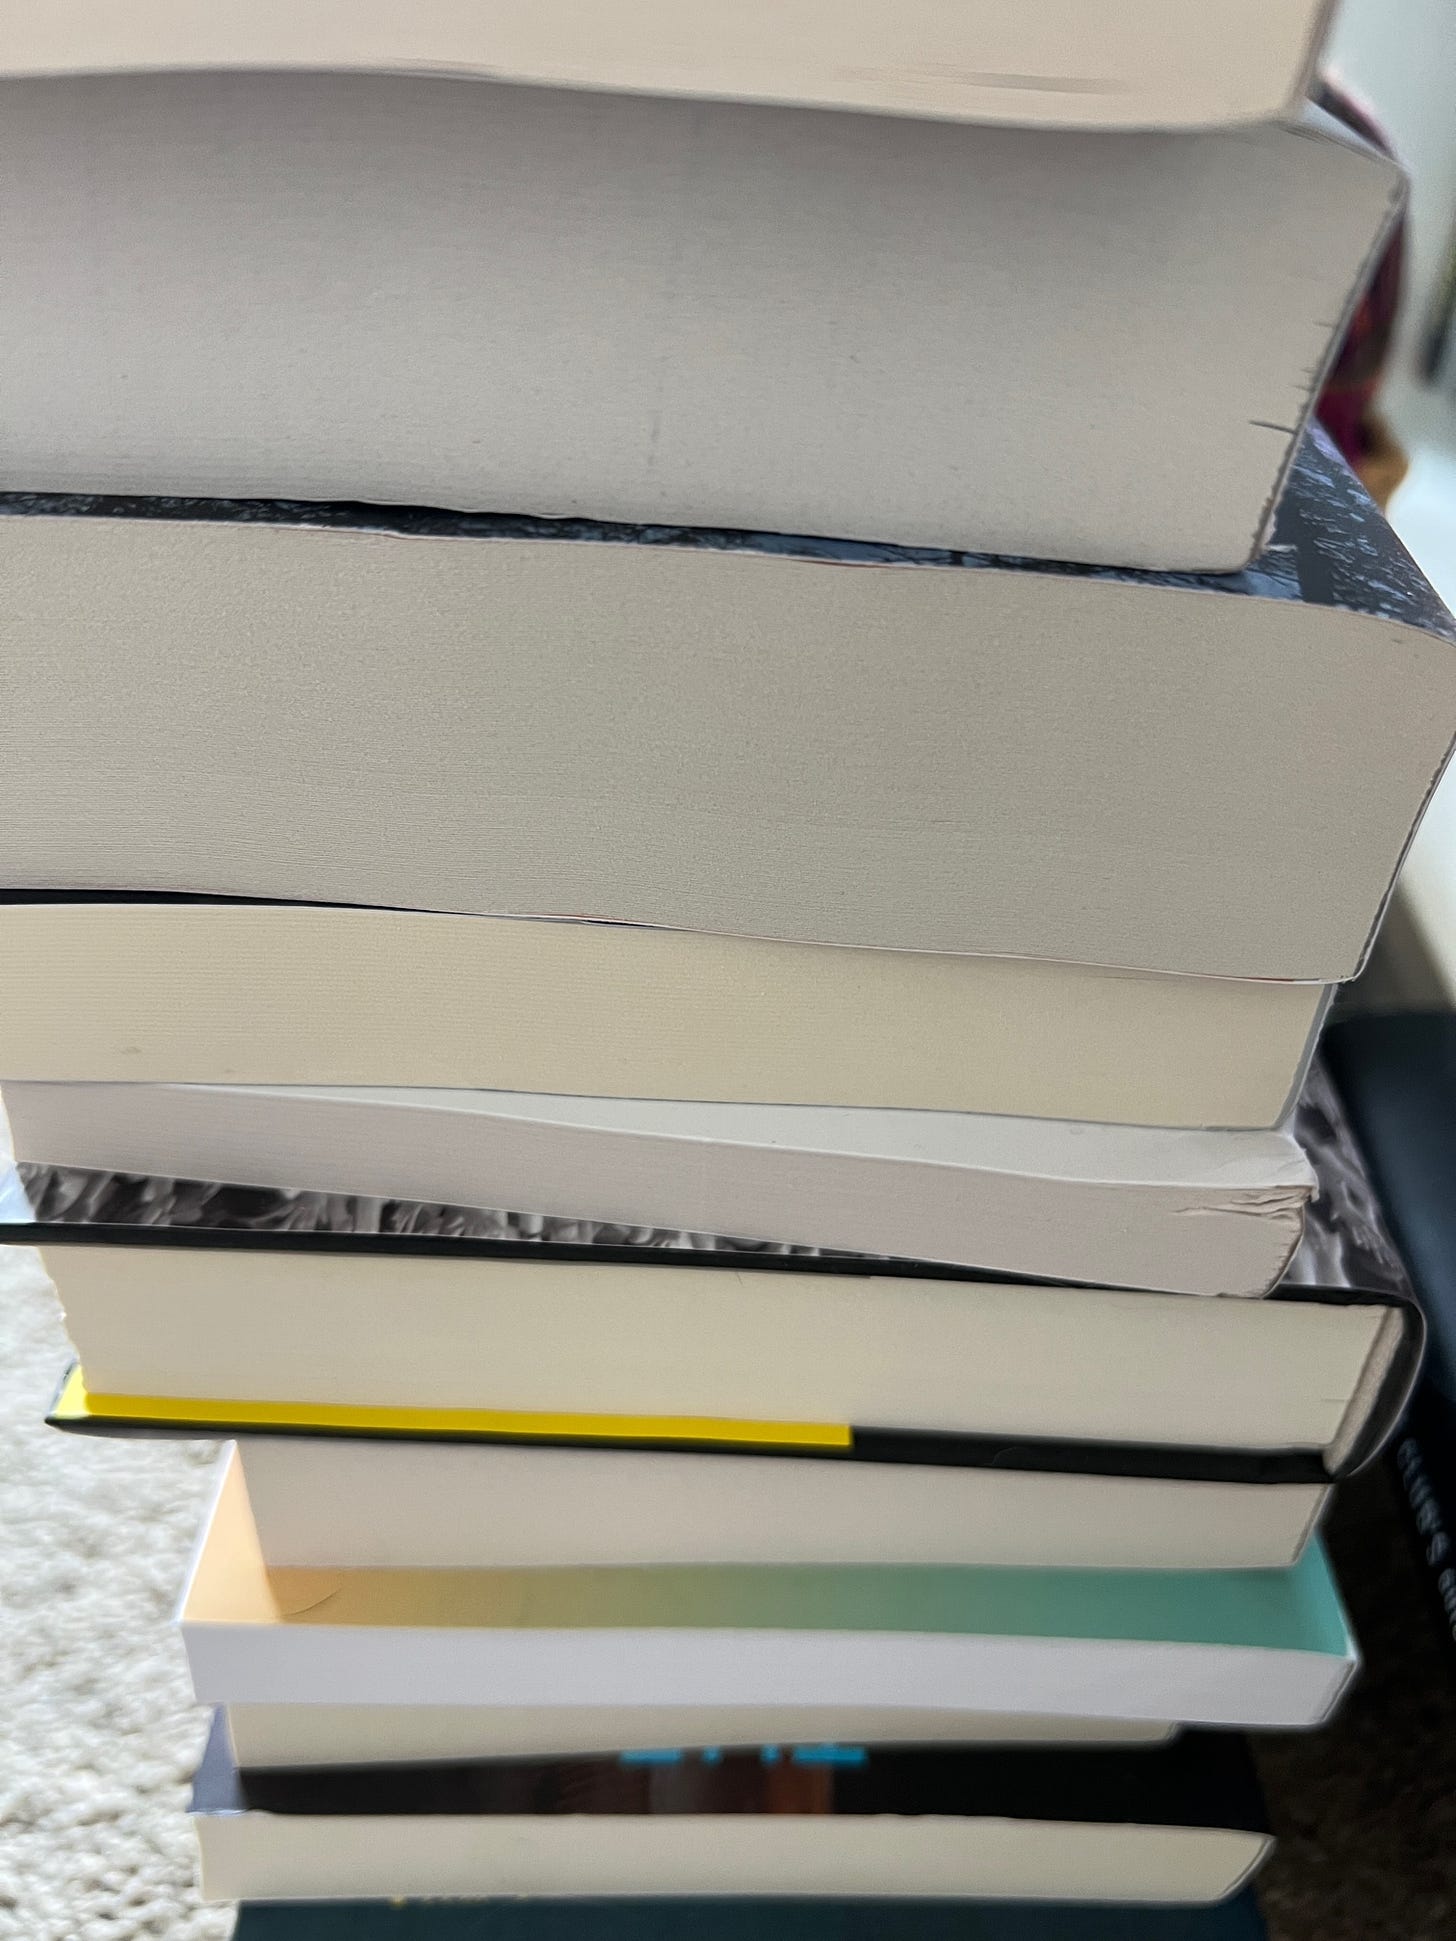 A stack of books where you cannot see the spines. 